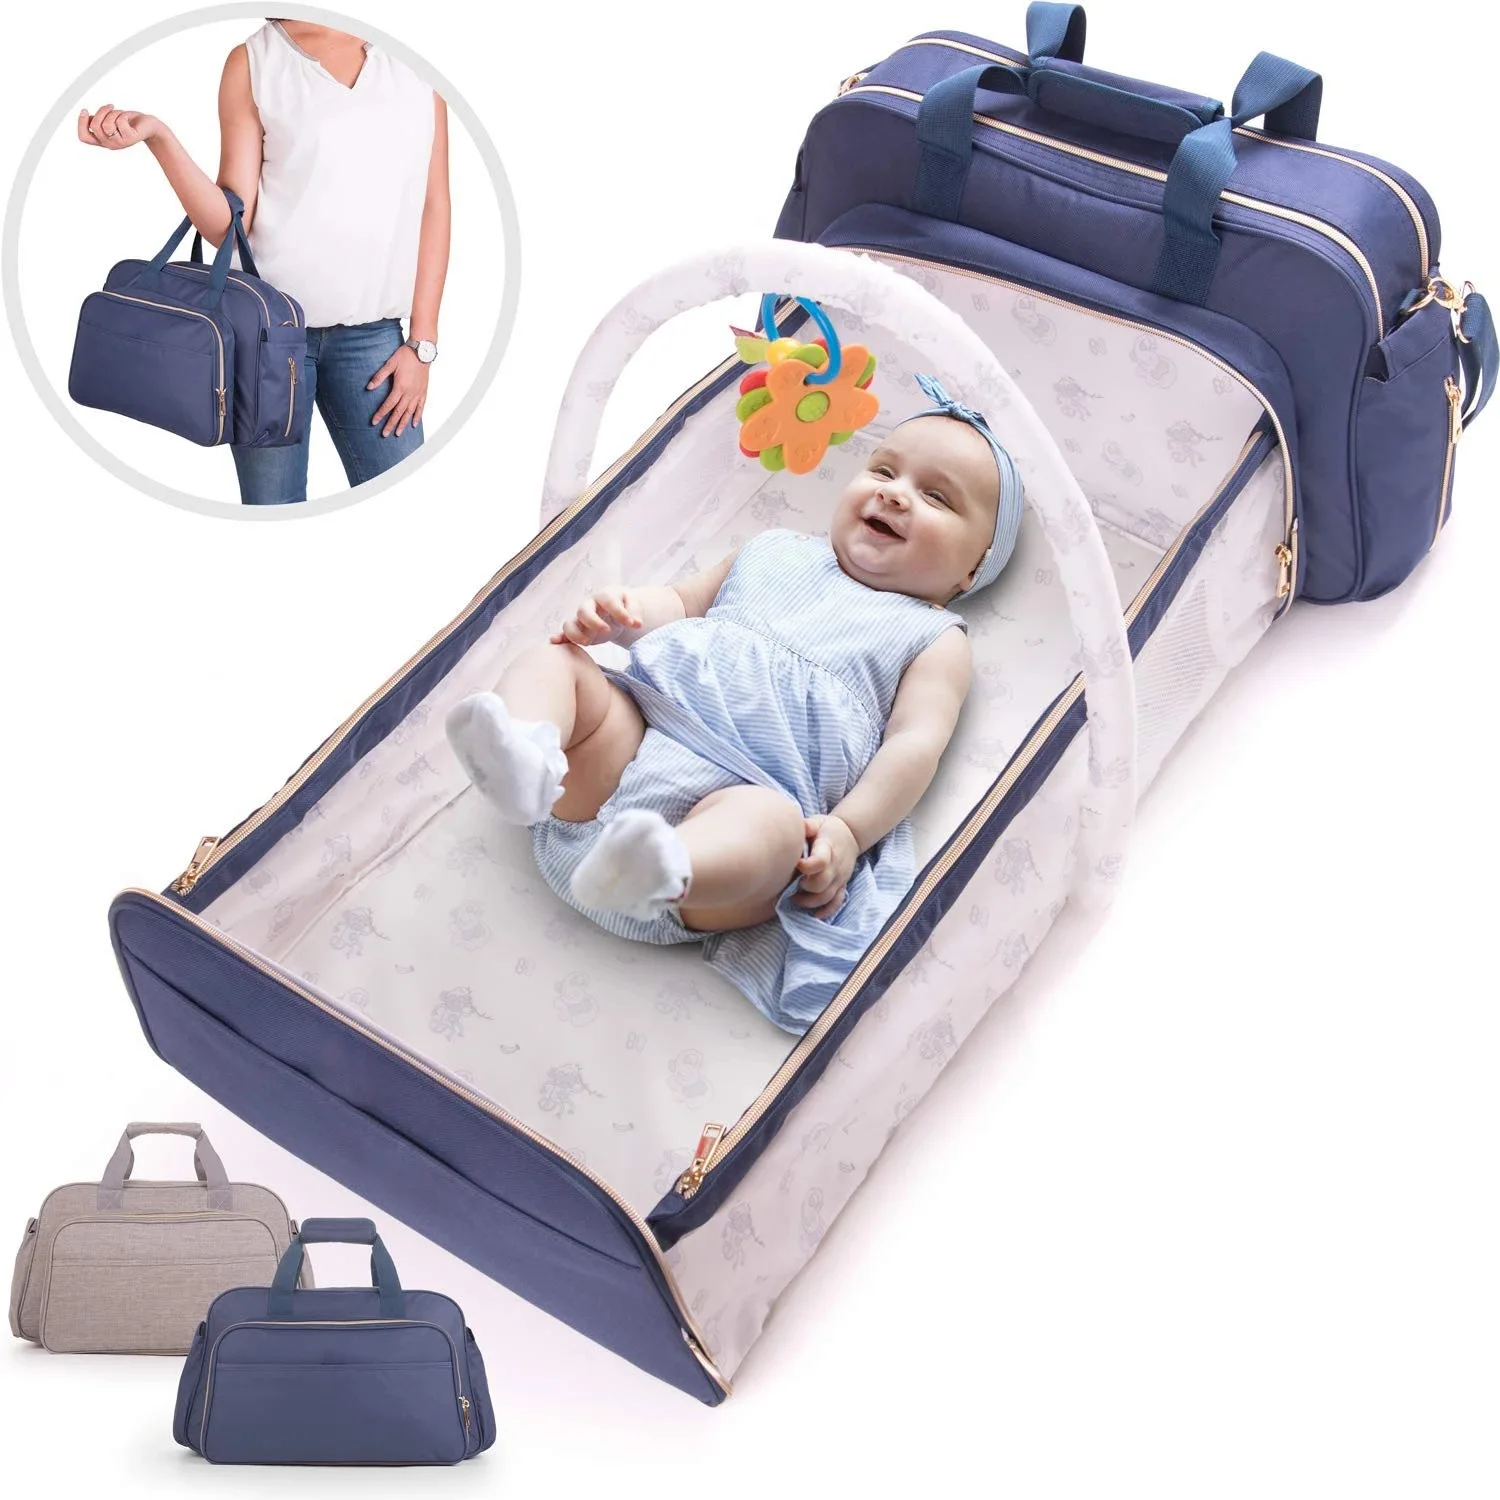 

Crib Bed Carry Cot Shoulder Accessories Nursing Diaper Bag Mommy Nappy Backpack Wholesale Folding Portable Baby Travel Nylon